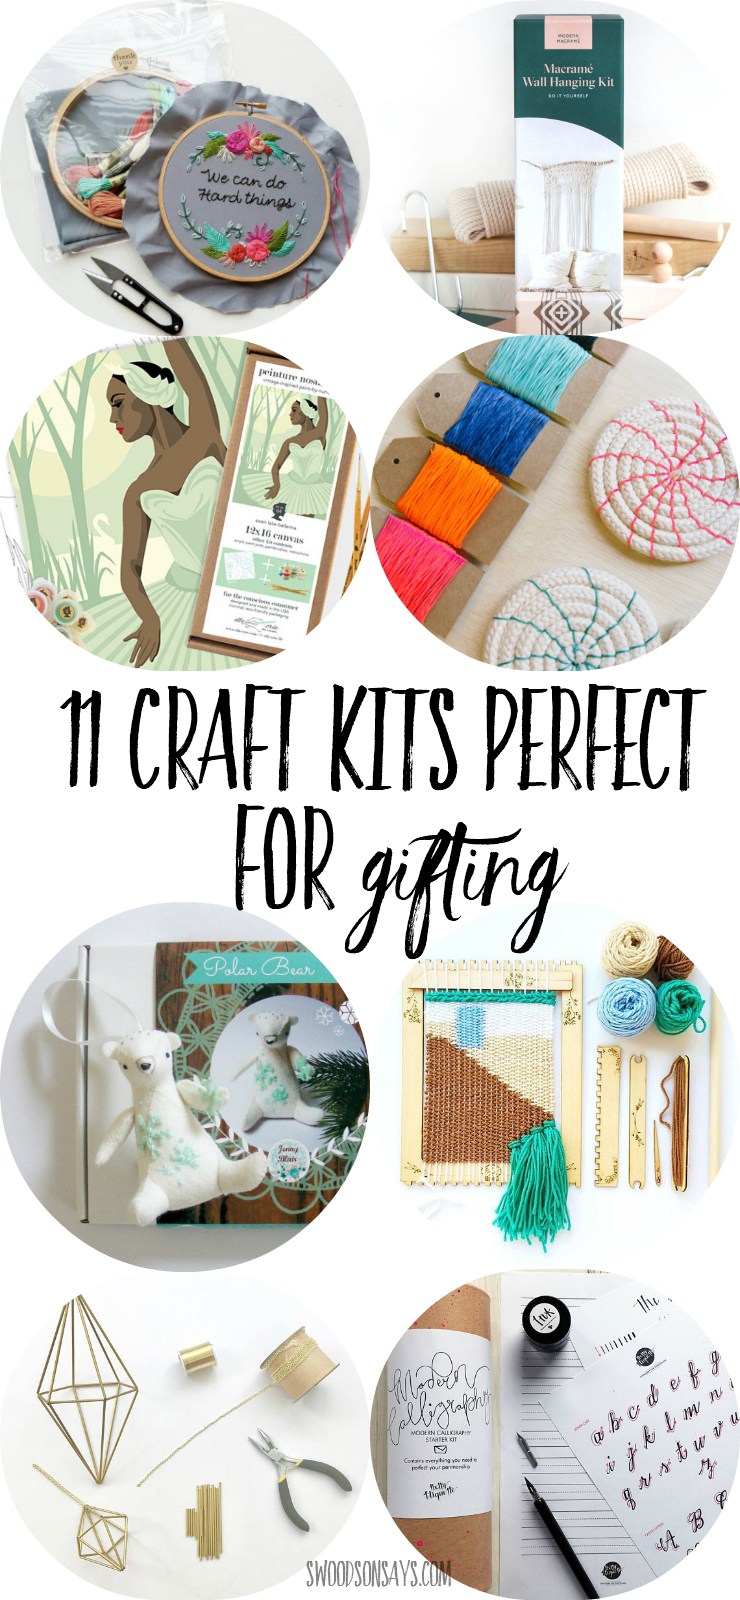 11 Craft Kits Perfect for Gifting